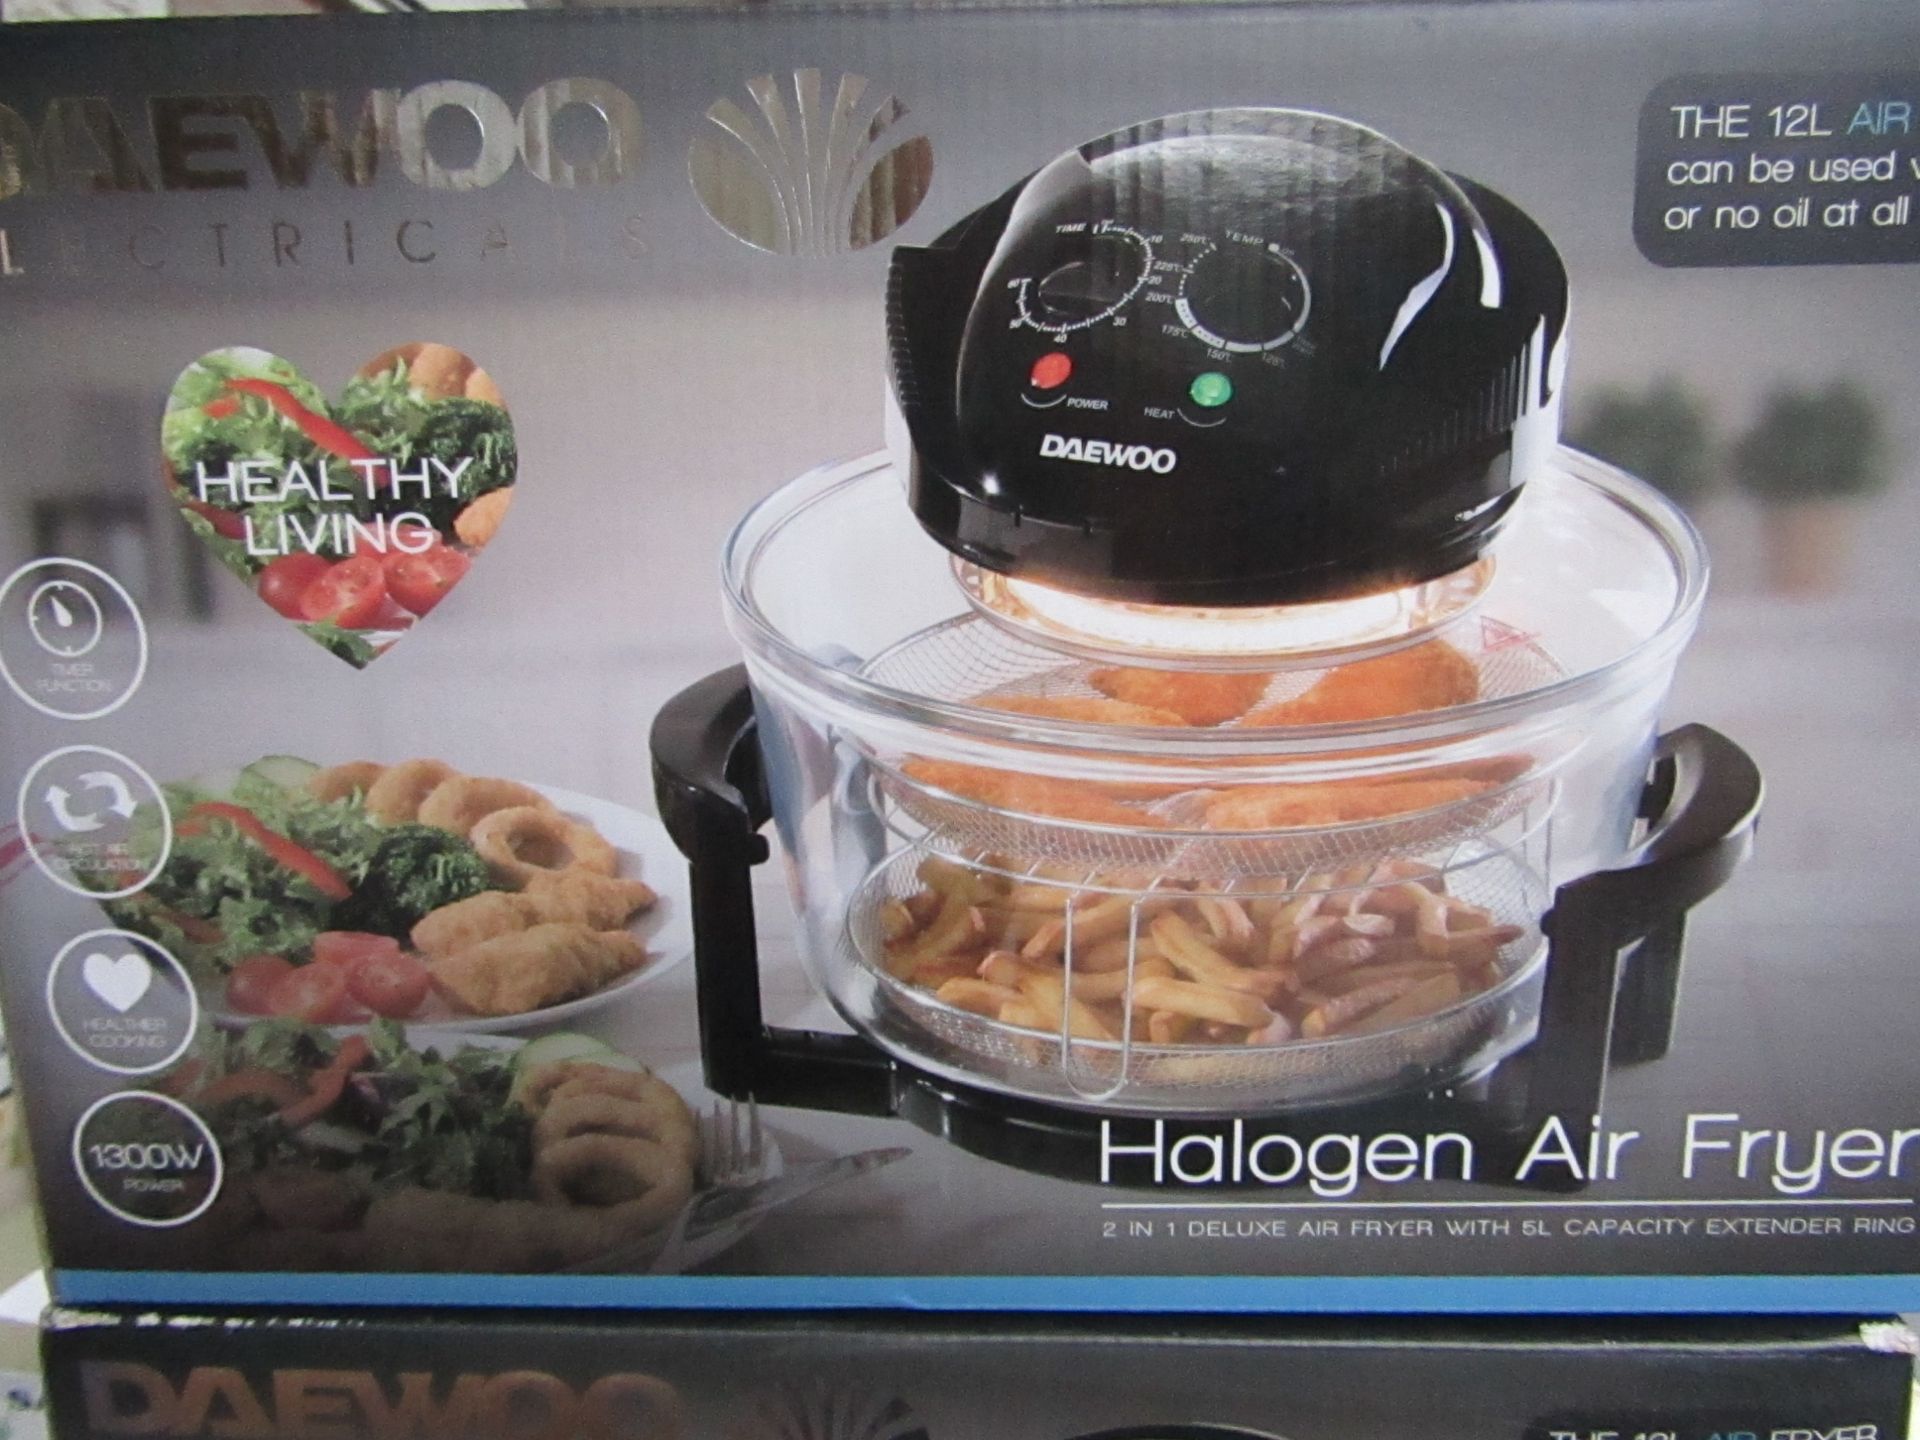 Daewoo halogen air fryer Boxed and unchecked